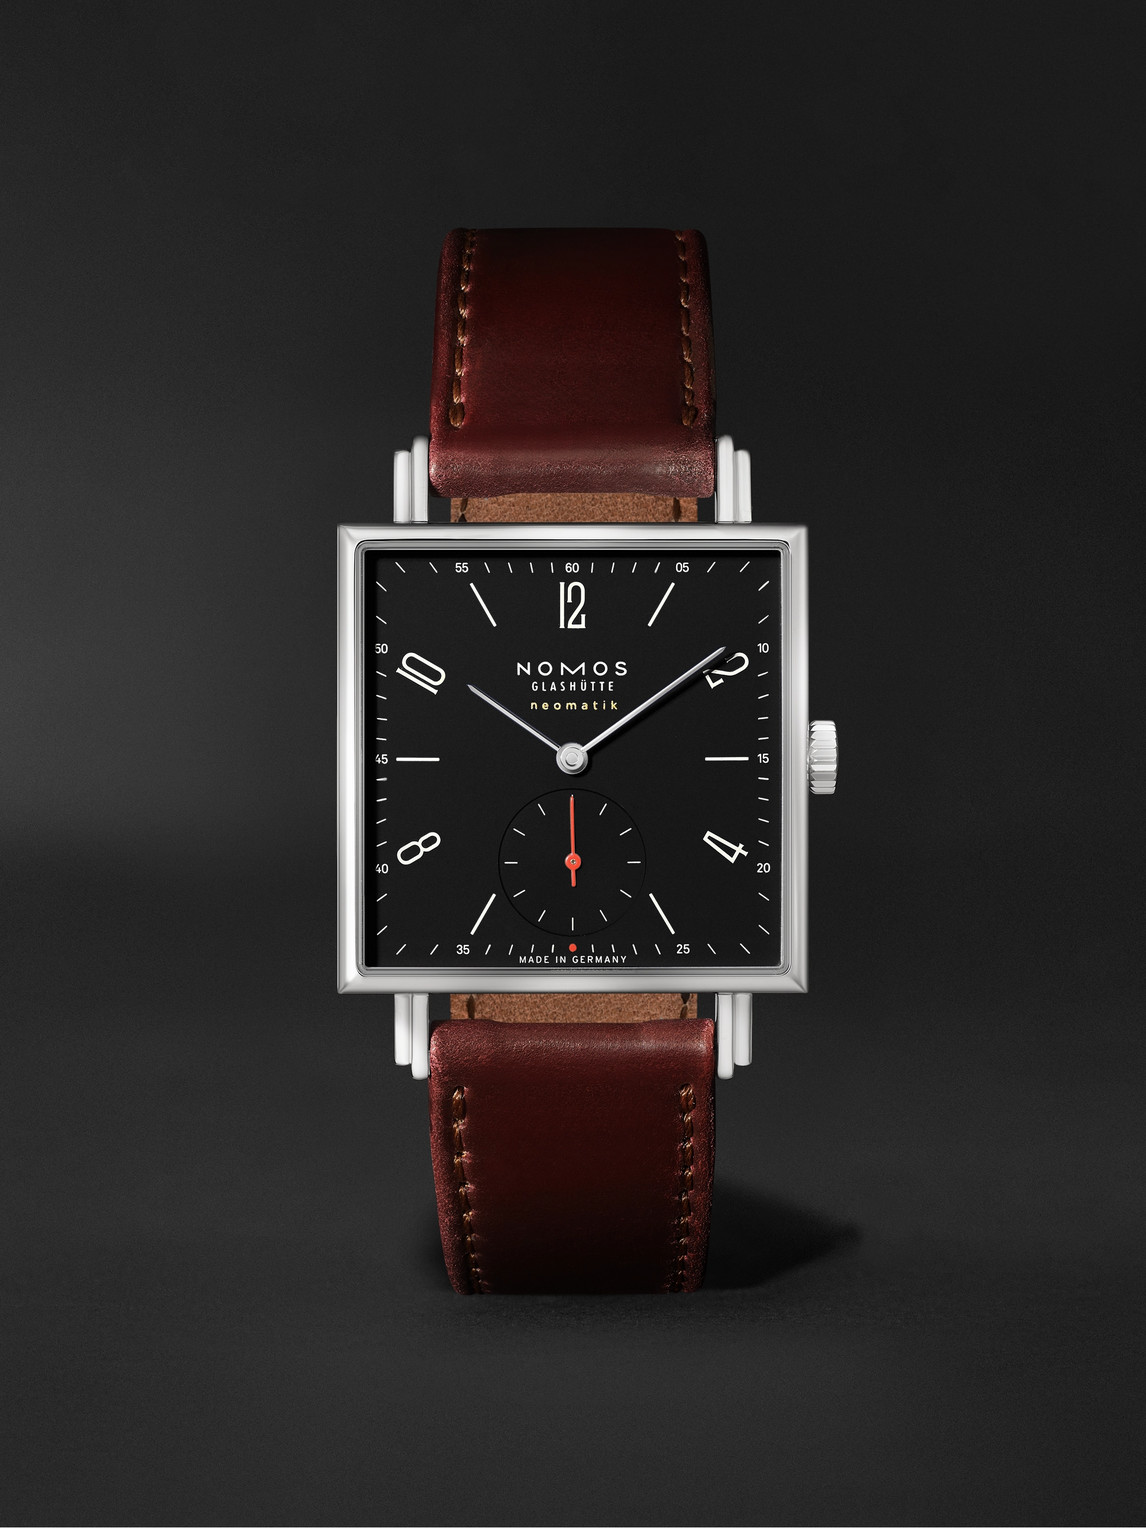 Nomos Glashütte Tetra Neomatik 39 Automatic 46mm Stainless Steel And Leather Watch, Ref. No. 421.s4 In Black